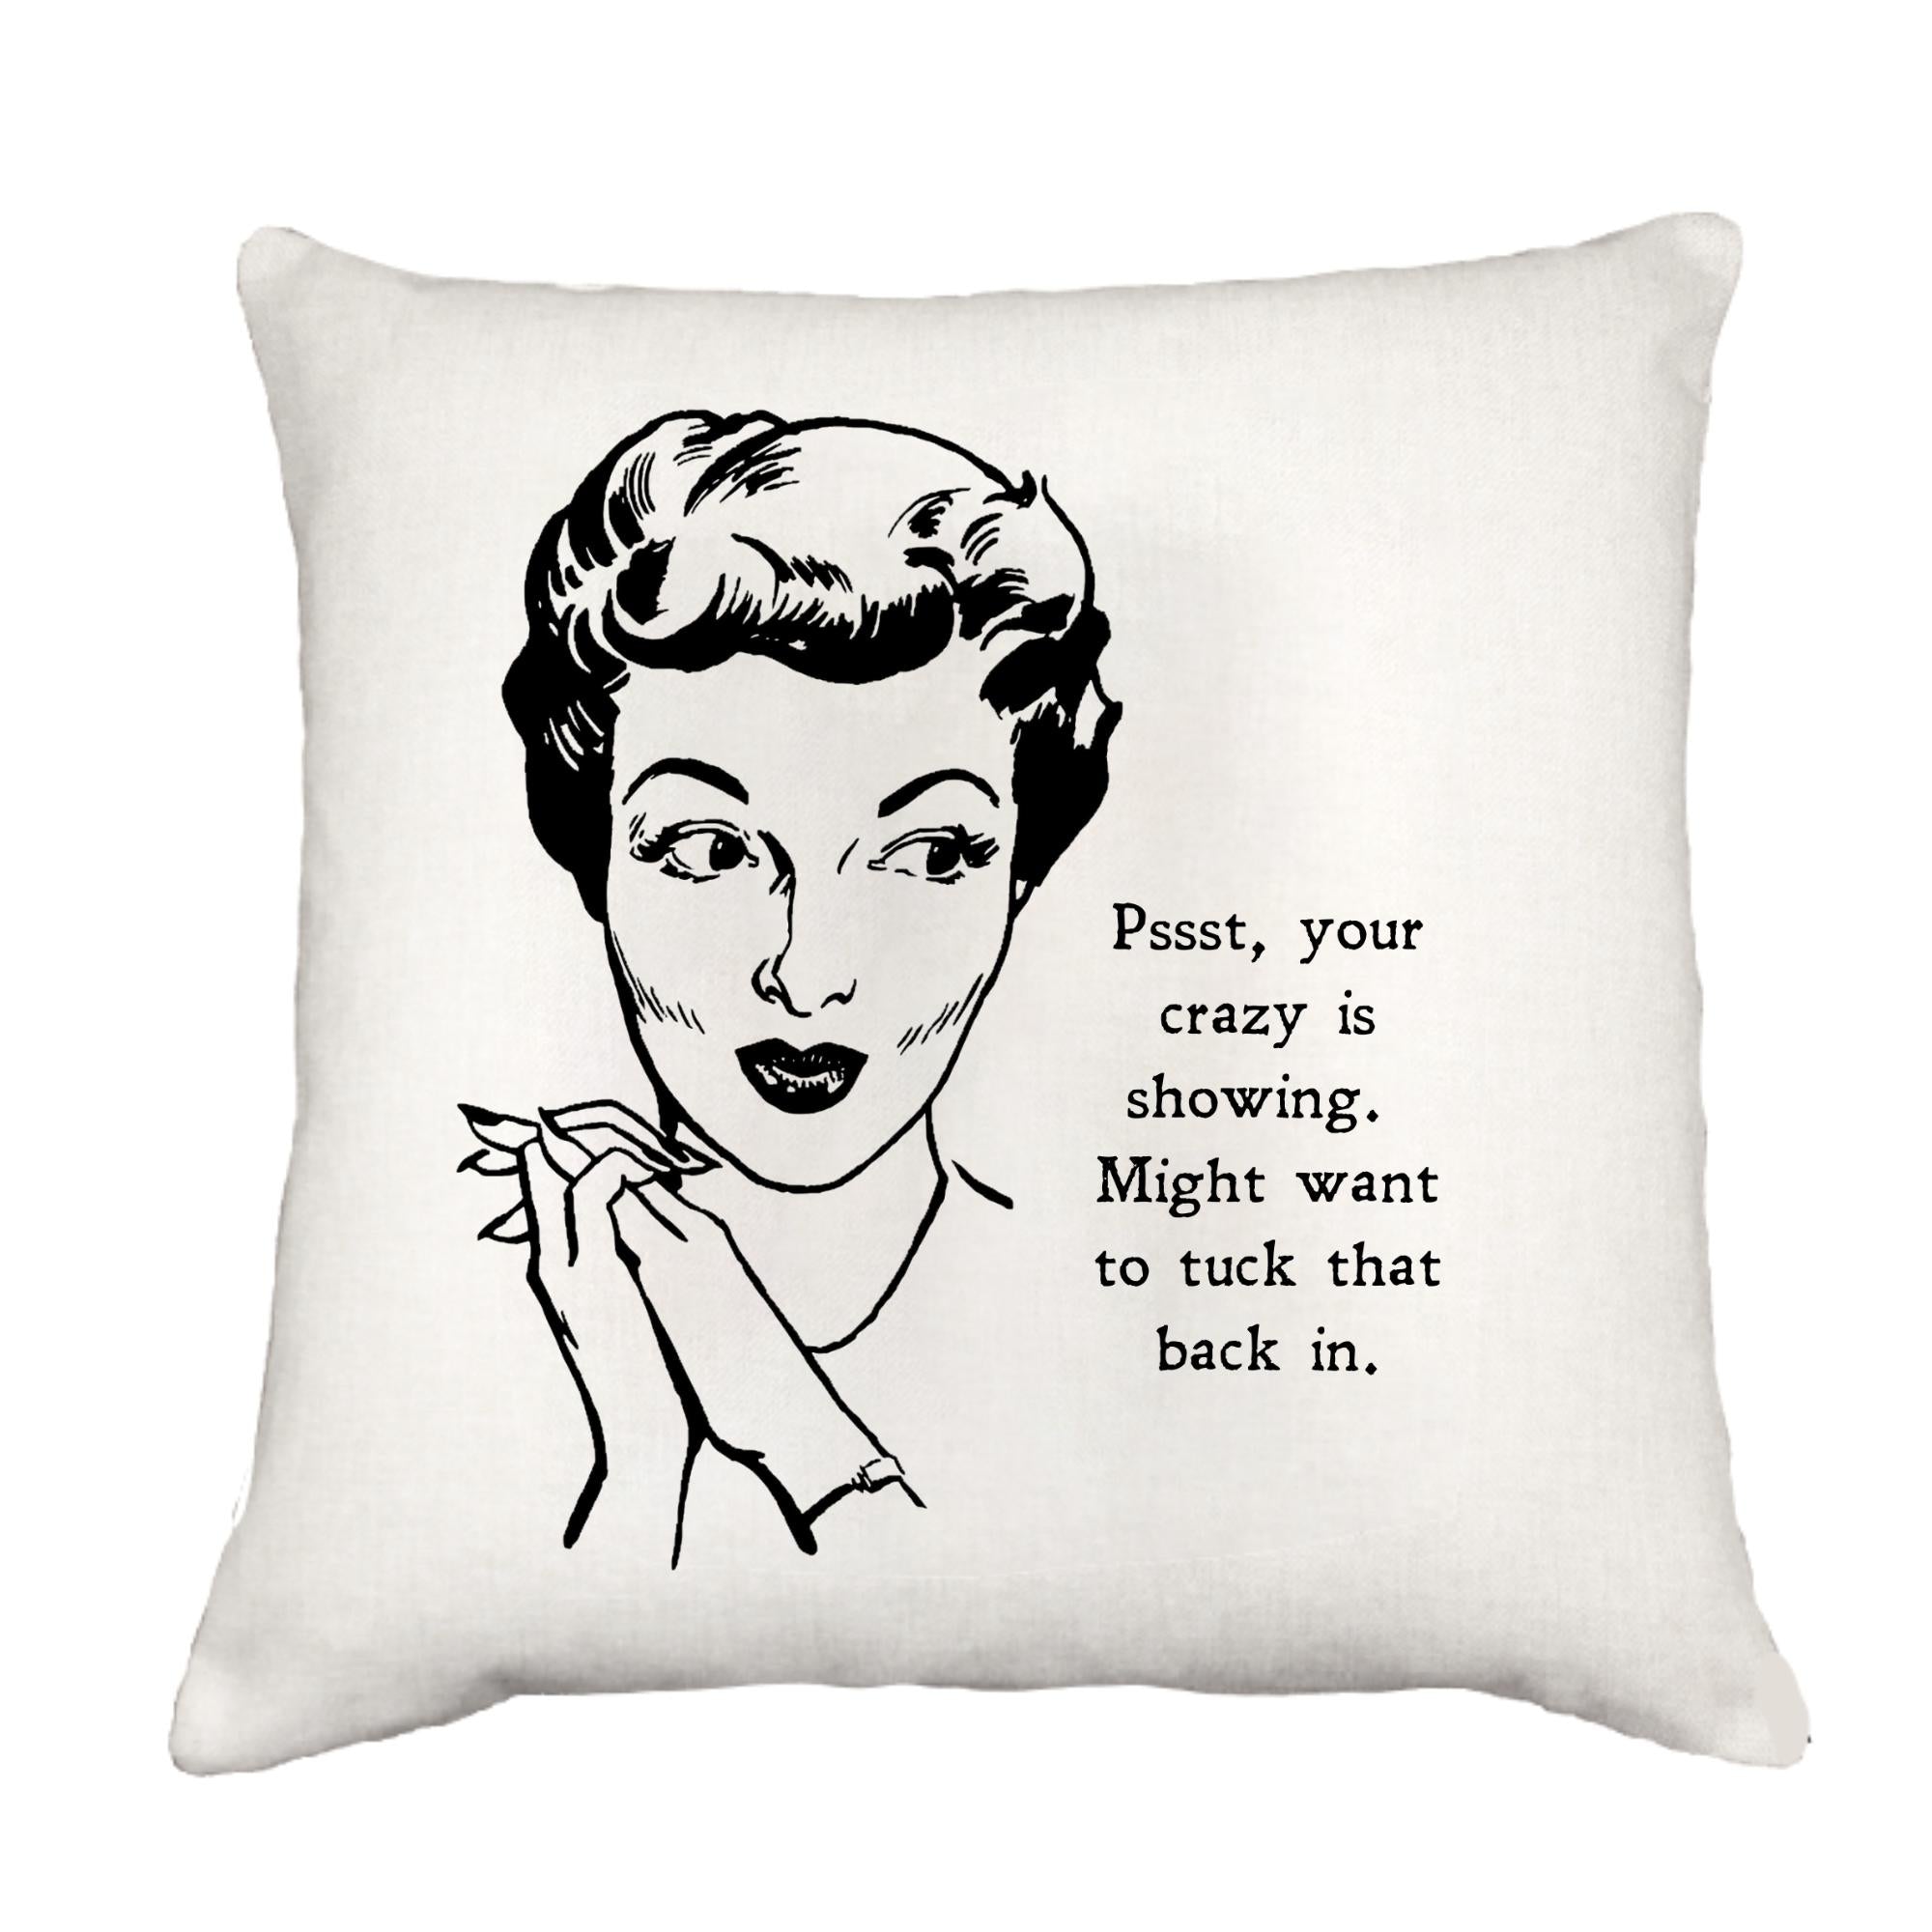 Crazy is Showing Cottage Pillow Throw/Decorative Pillow - Southern Sisters